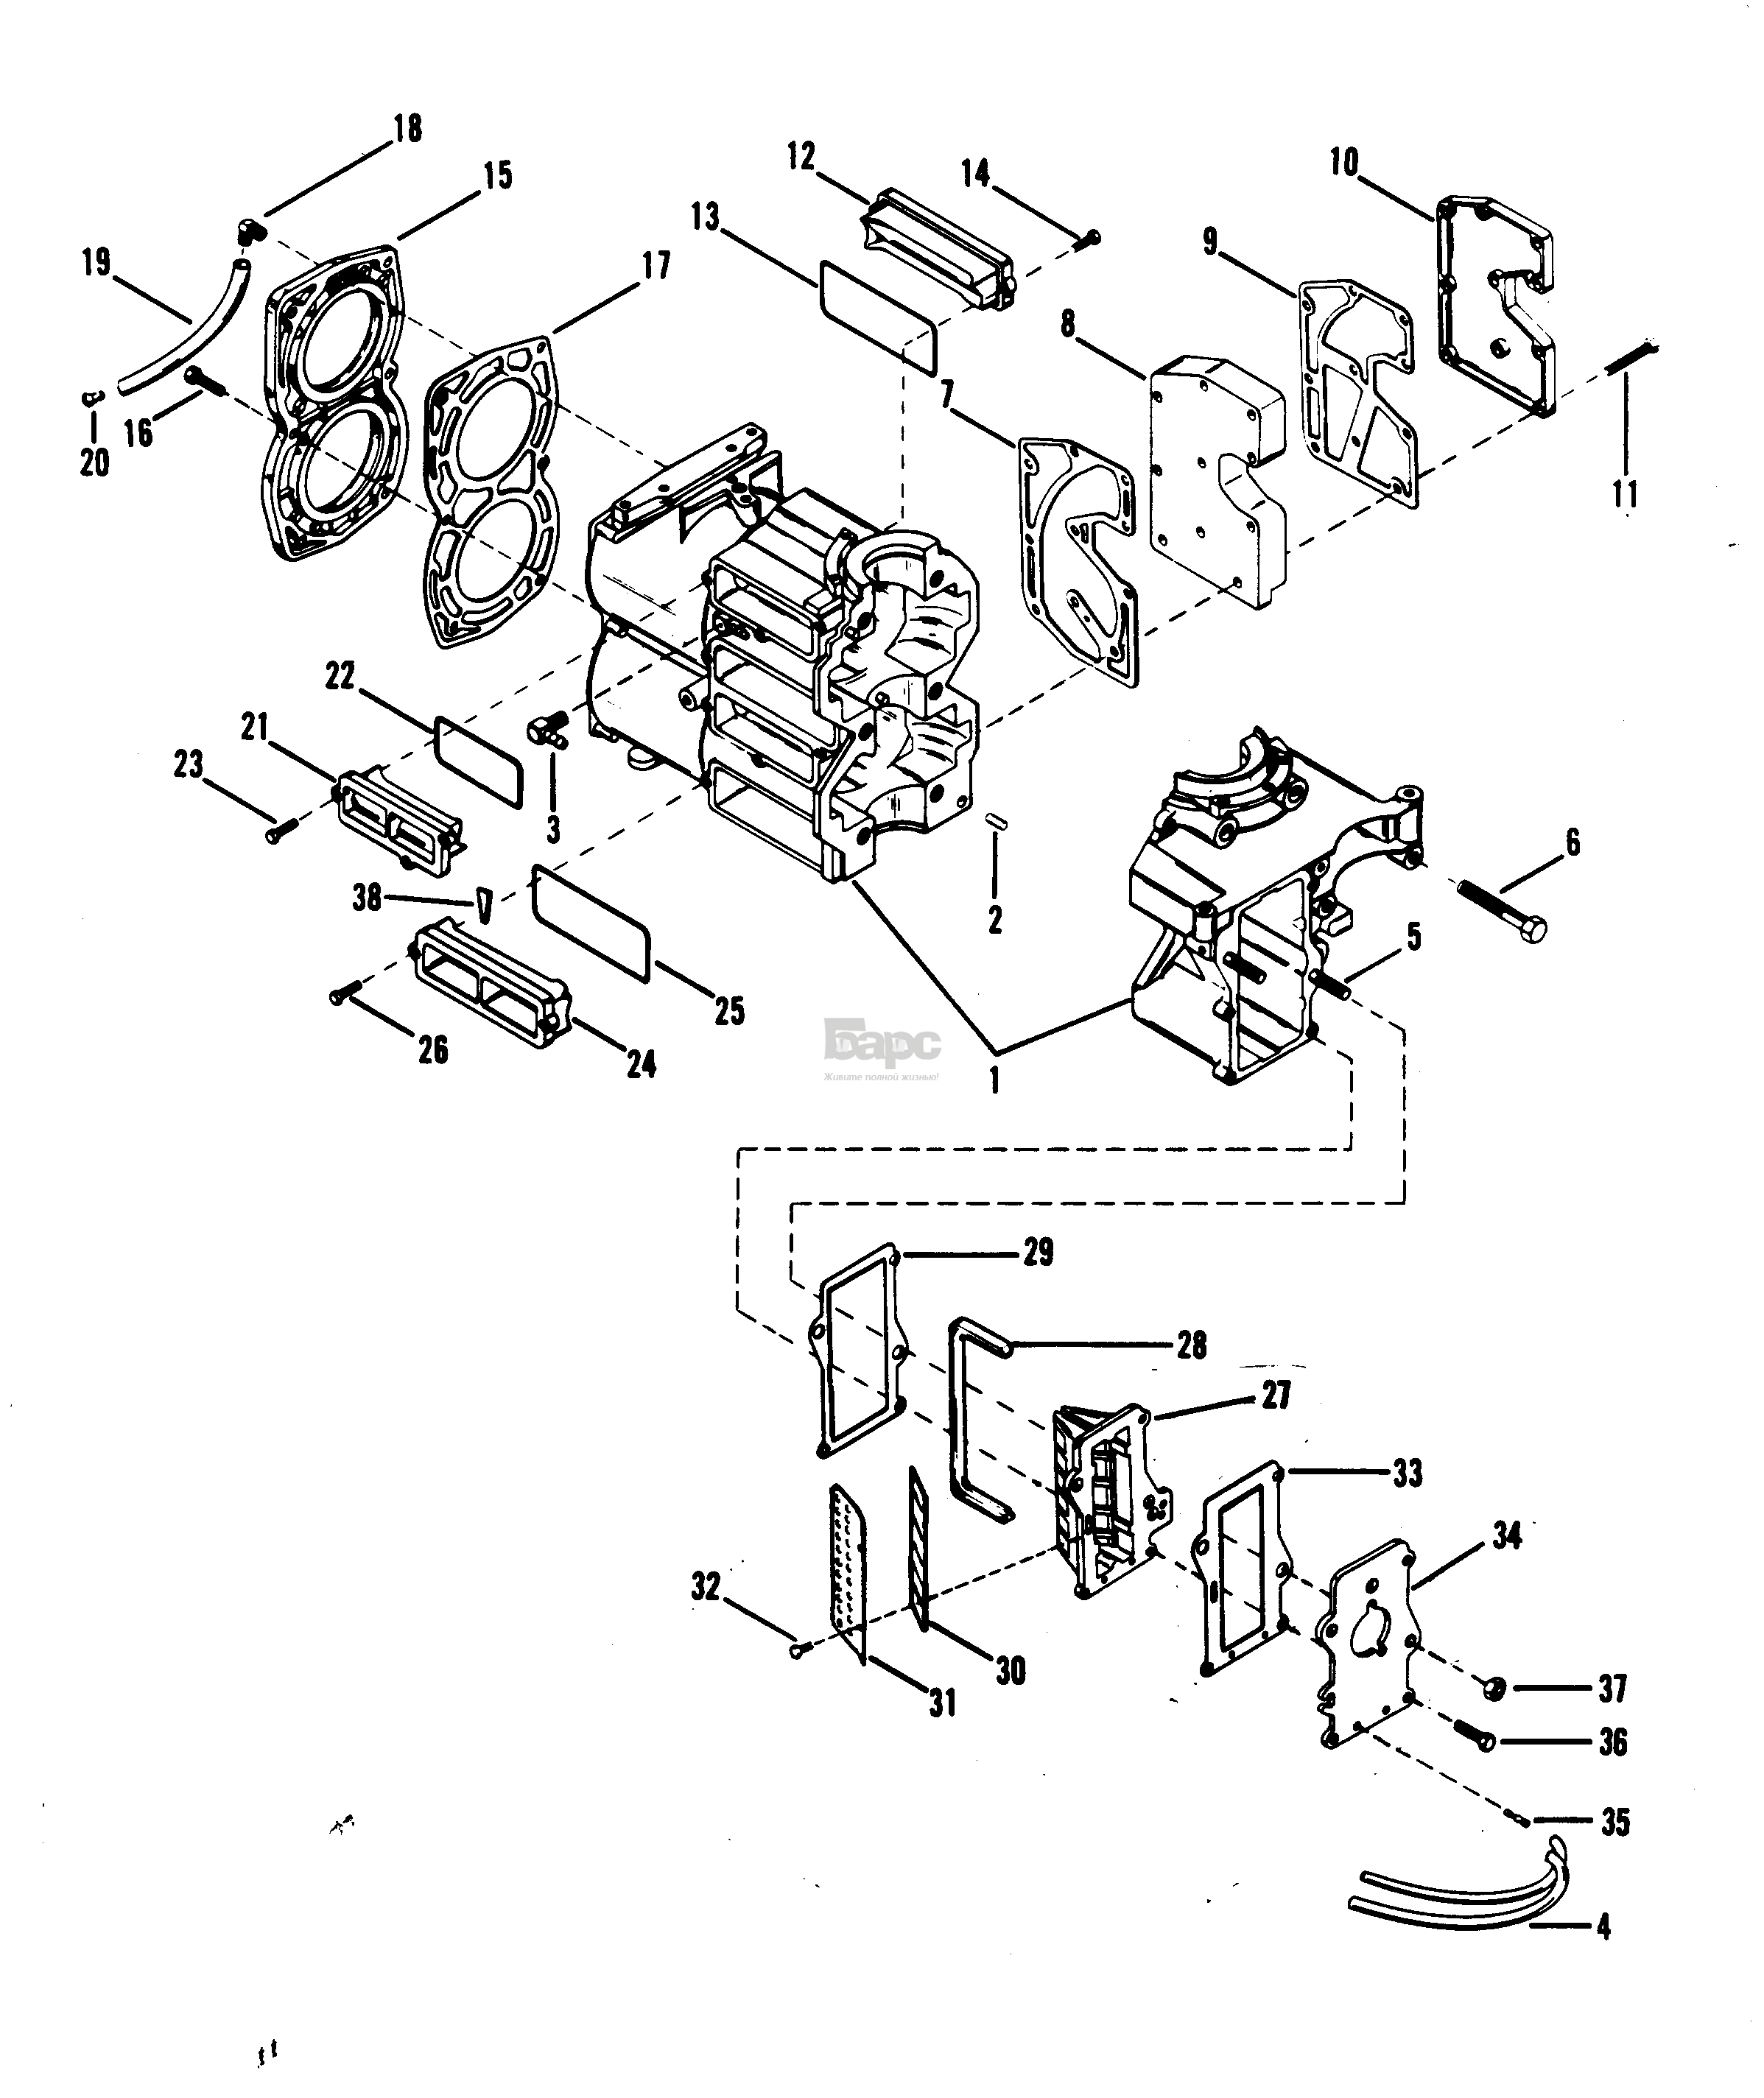 CYLINDER BLOCK AND COVERS (SERIAL GROUP #1)